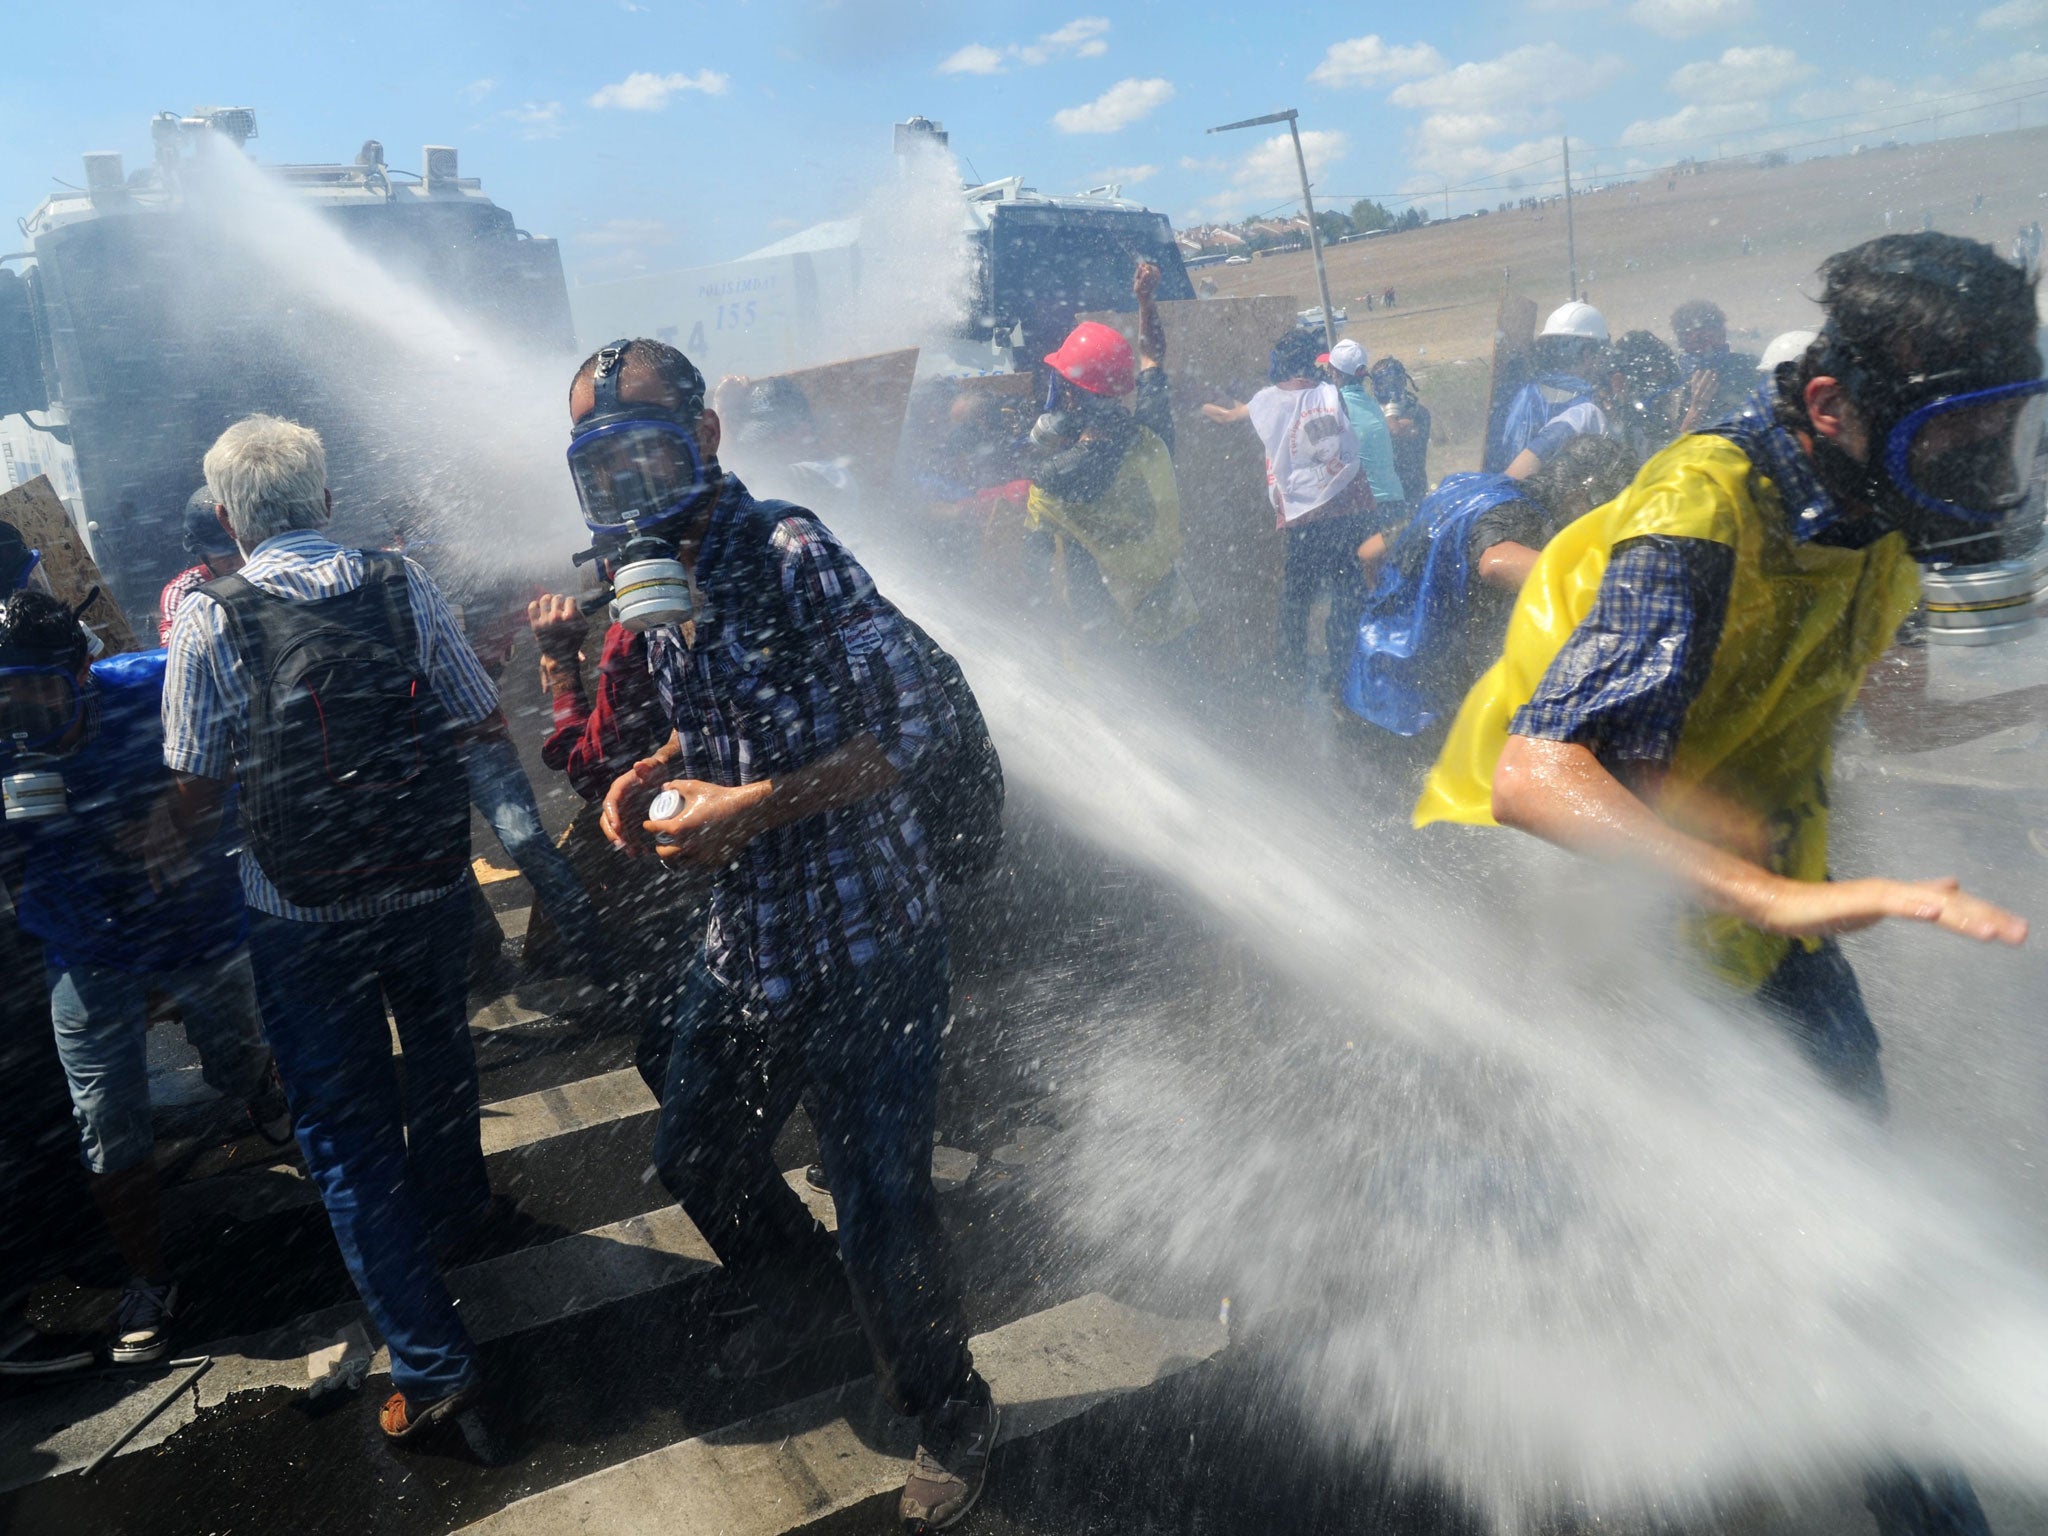 Demonstrators are hit by water cannon during clashes against Turkish police forces